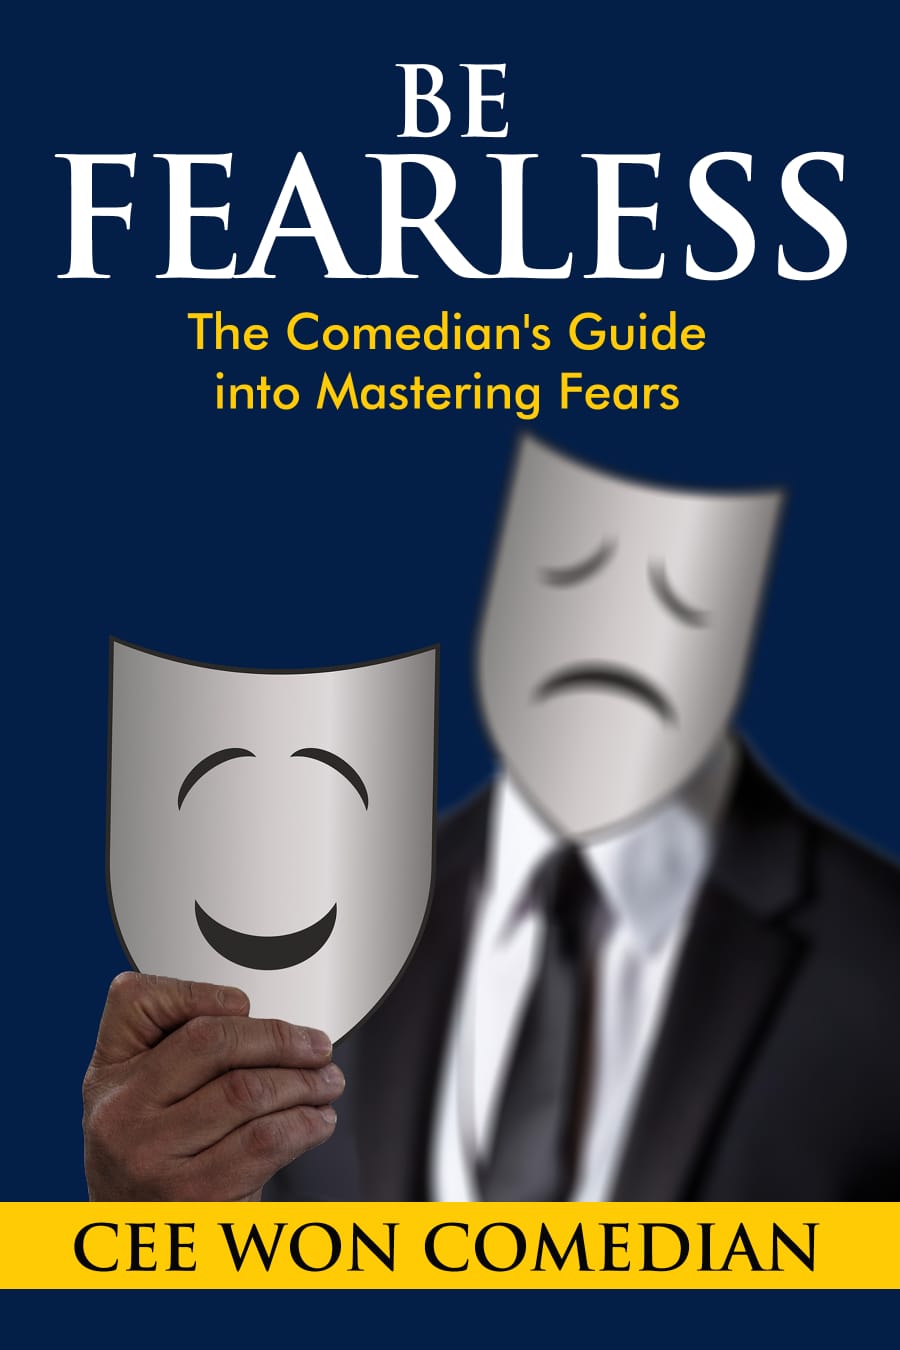 FREE: BE FEARLESS: The Comedian’s Guide into Mastering Fears by Cee Won Comedian